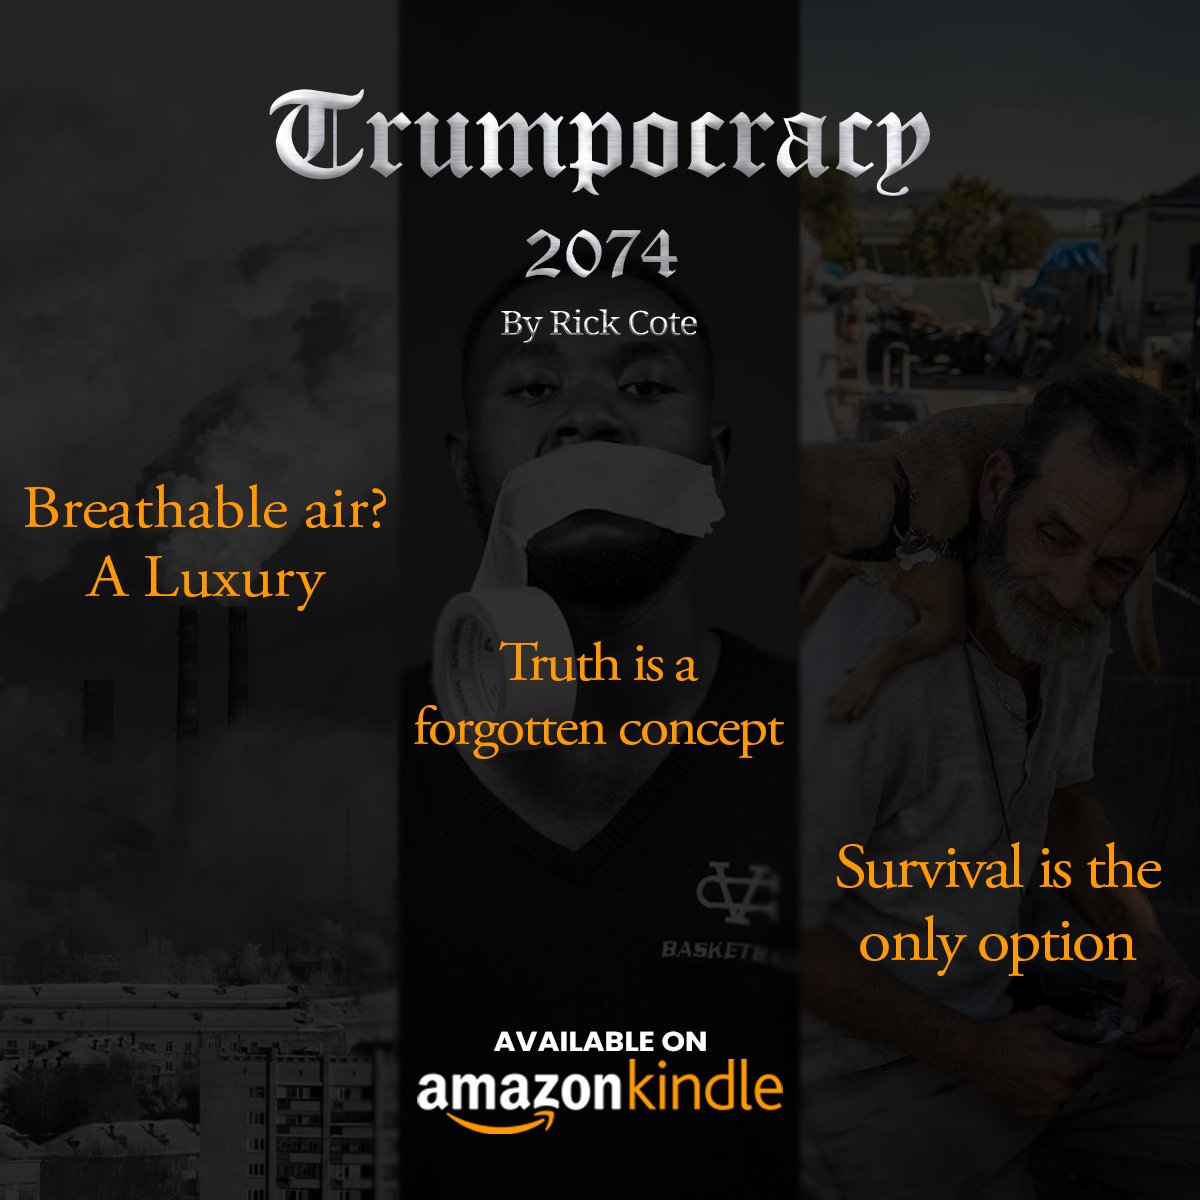 Step into the ravaged reality of Trumpocracy. Pollution, oppression, and a constant struggle for survival await. Dive into the gripping tale—available now on Amazon!

#dystopian #fictionbooks #ordernow #dystopianfuture #booklovers #Trumocracy2074 #MondayMotivation